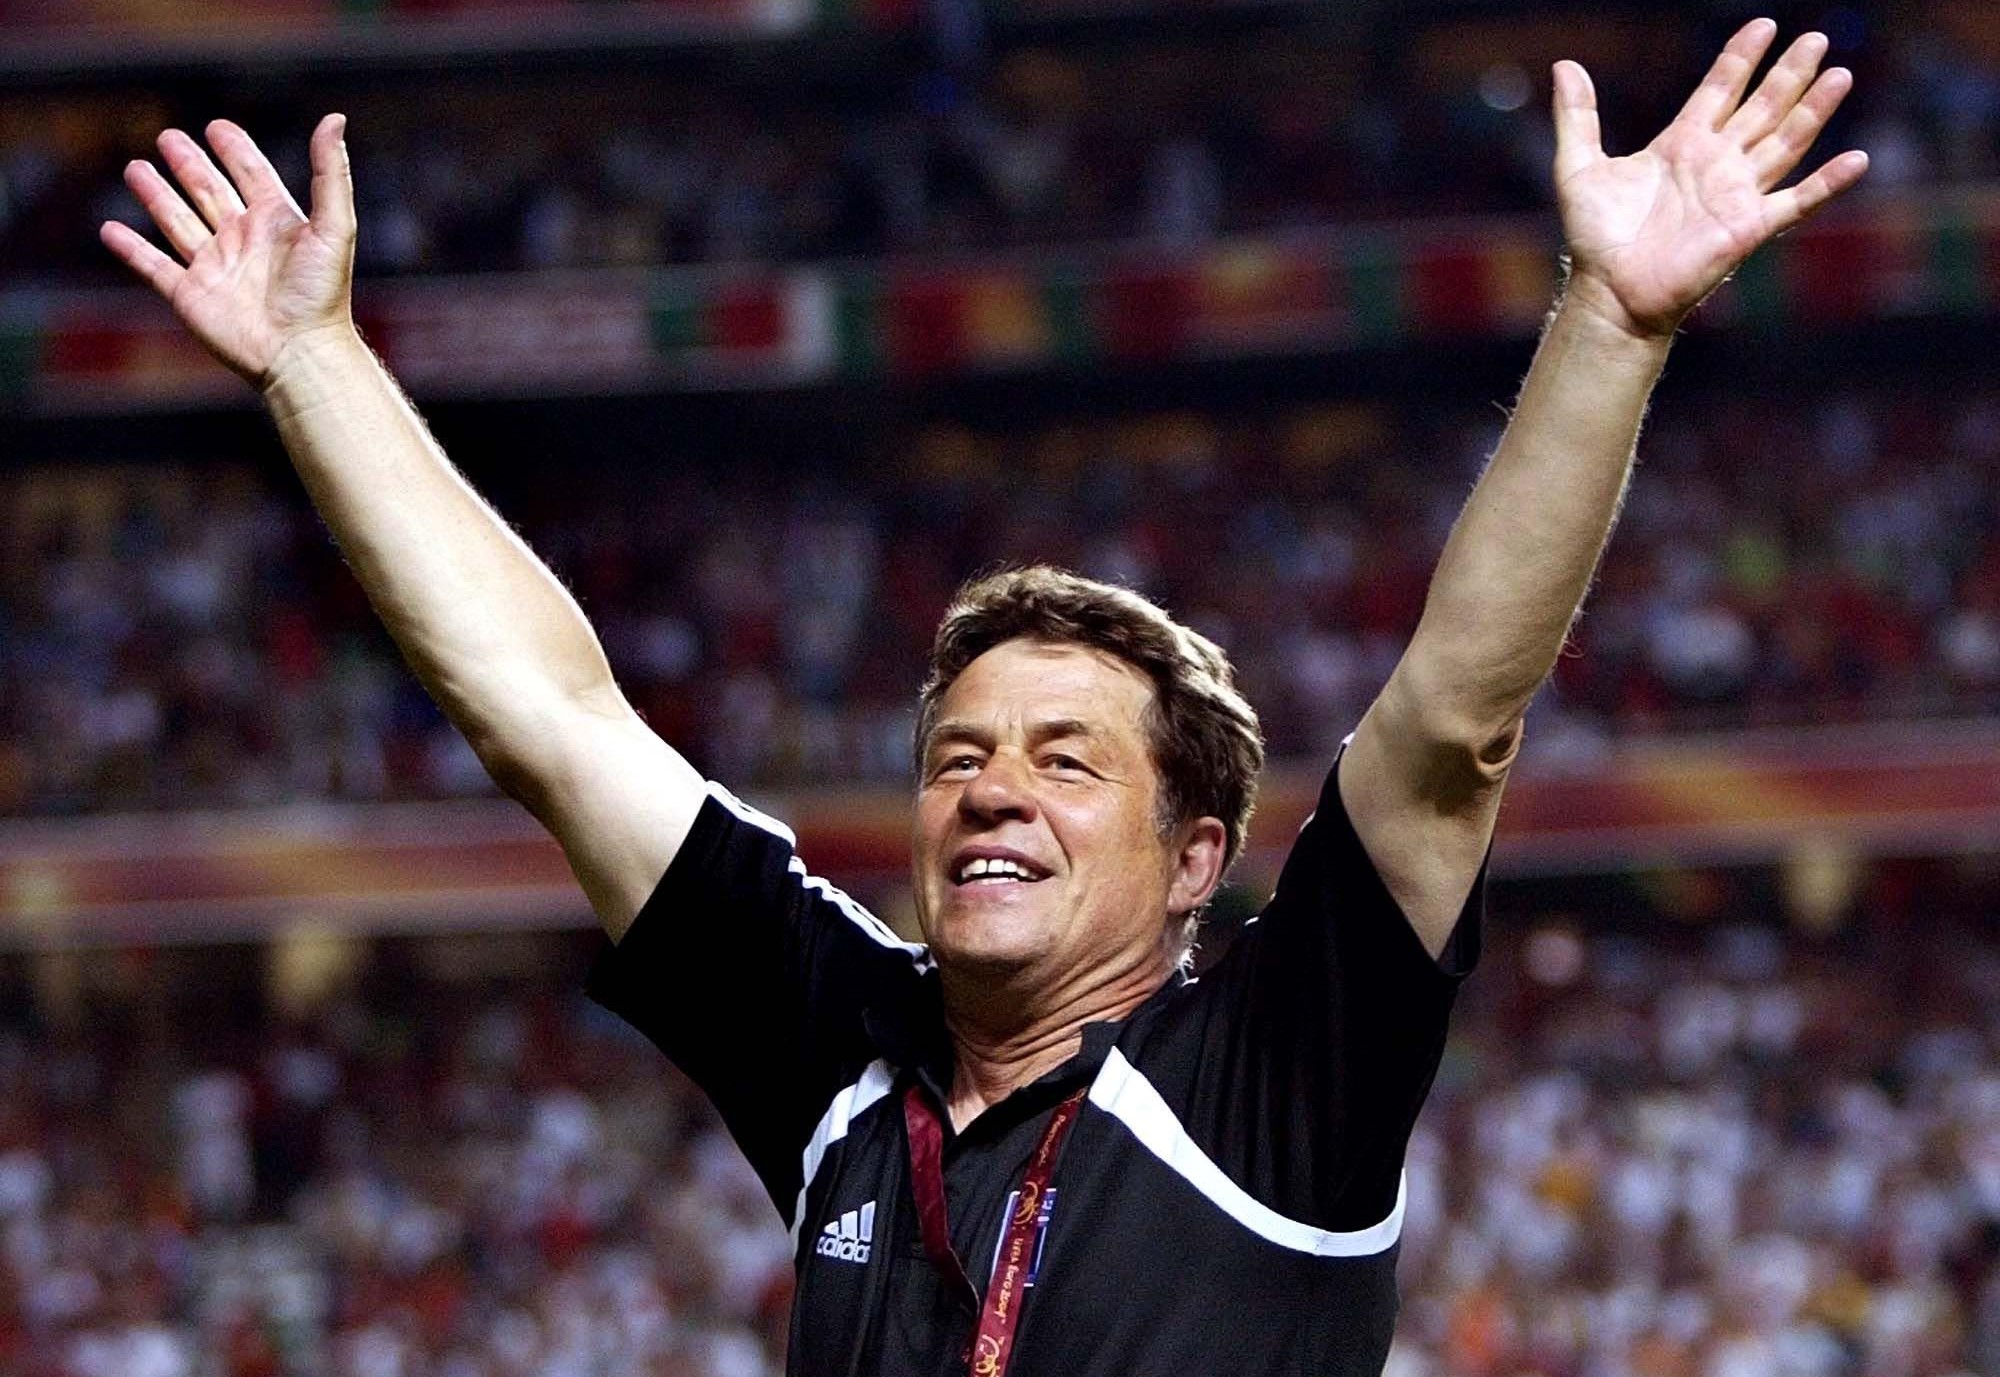 Greece soccer team coach Otto Rehhagel of Germany waves after Greece beat Portugal 1-0 in the Euro 2004 soccer championship final at the Luz stadium in Lisbon, Portugal, Sunday, July 4, 2004. (AP Photo/Steven Governo) **  FOR EDITORIAL USE ONLY NO WIRELESS COMMERCIAL OR PROMOTIONAL LICENSING PERMITTED  **